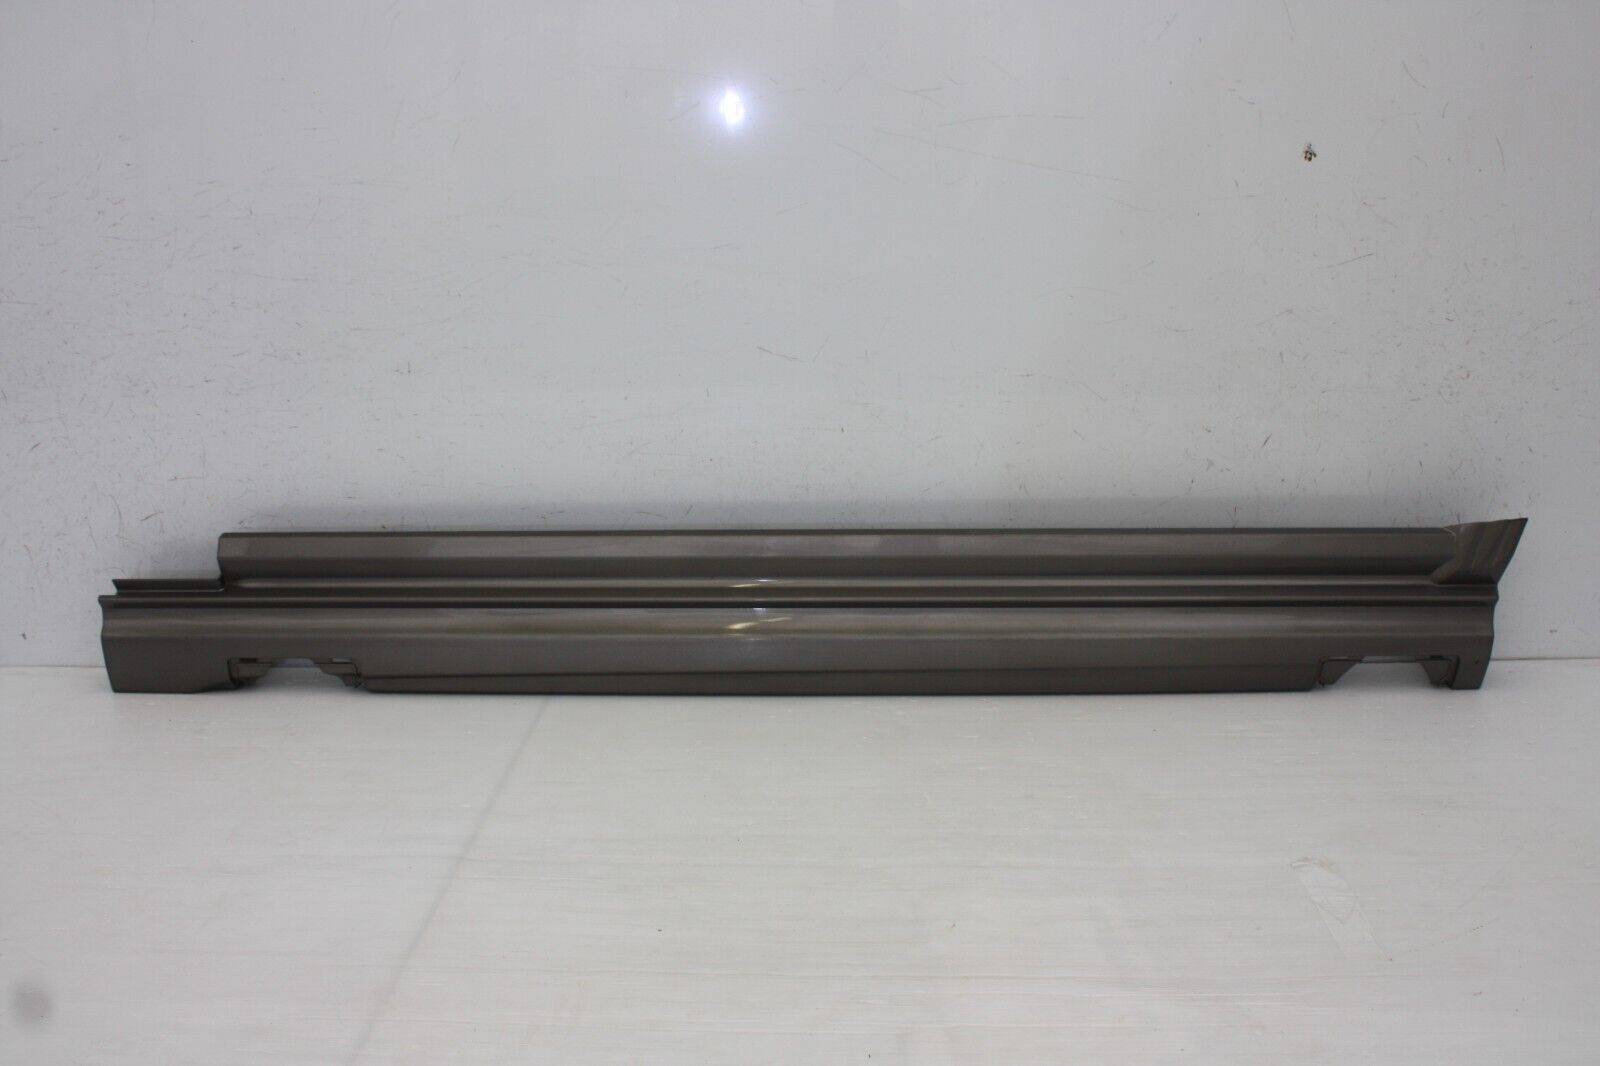 Range Rover Autobiography Left Side Skirt 2009 TO 2012 BH4M 200B09 A Genuine 175441196343